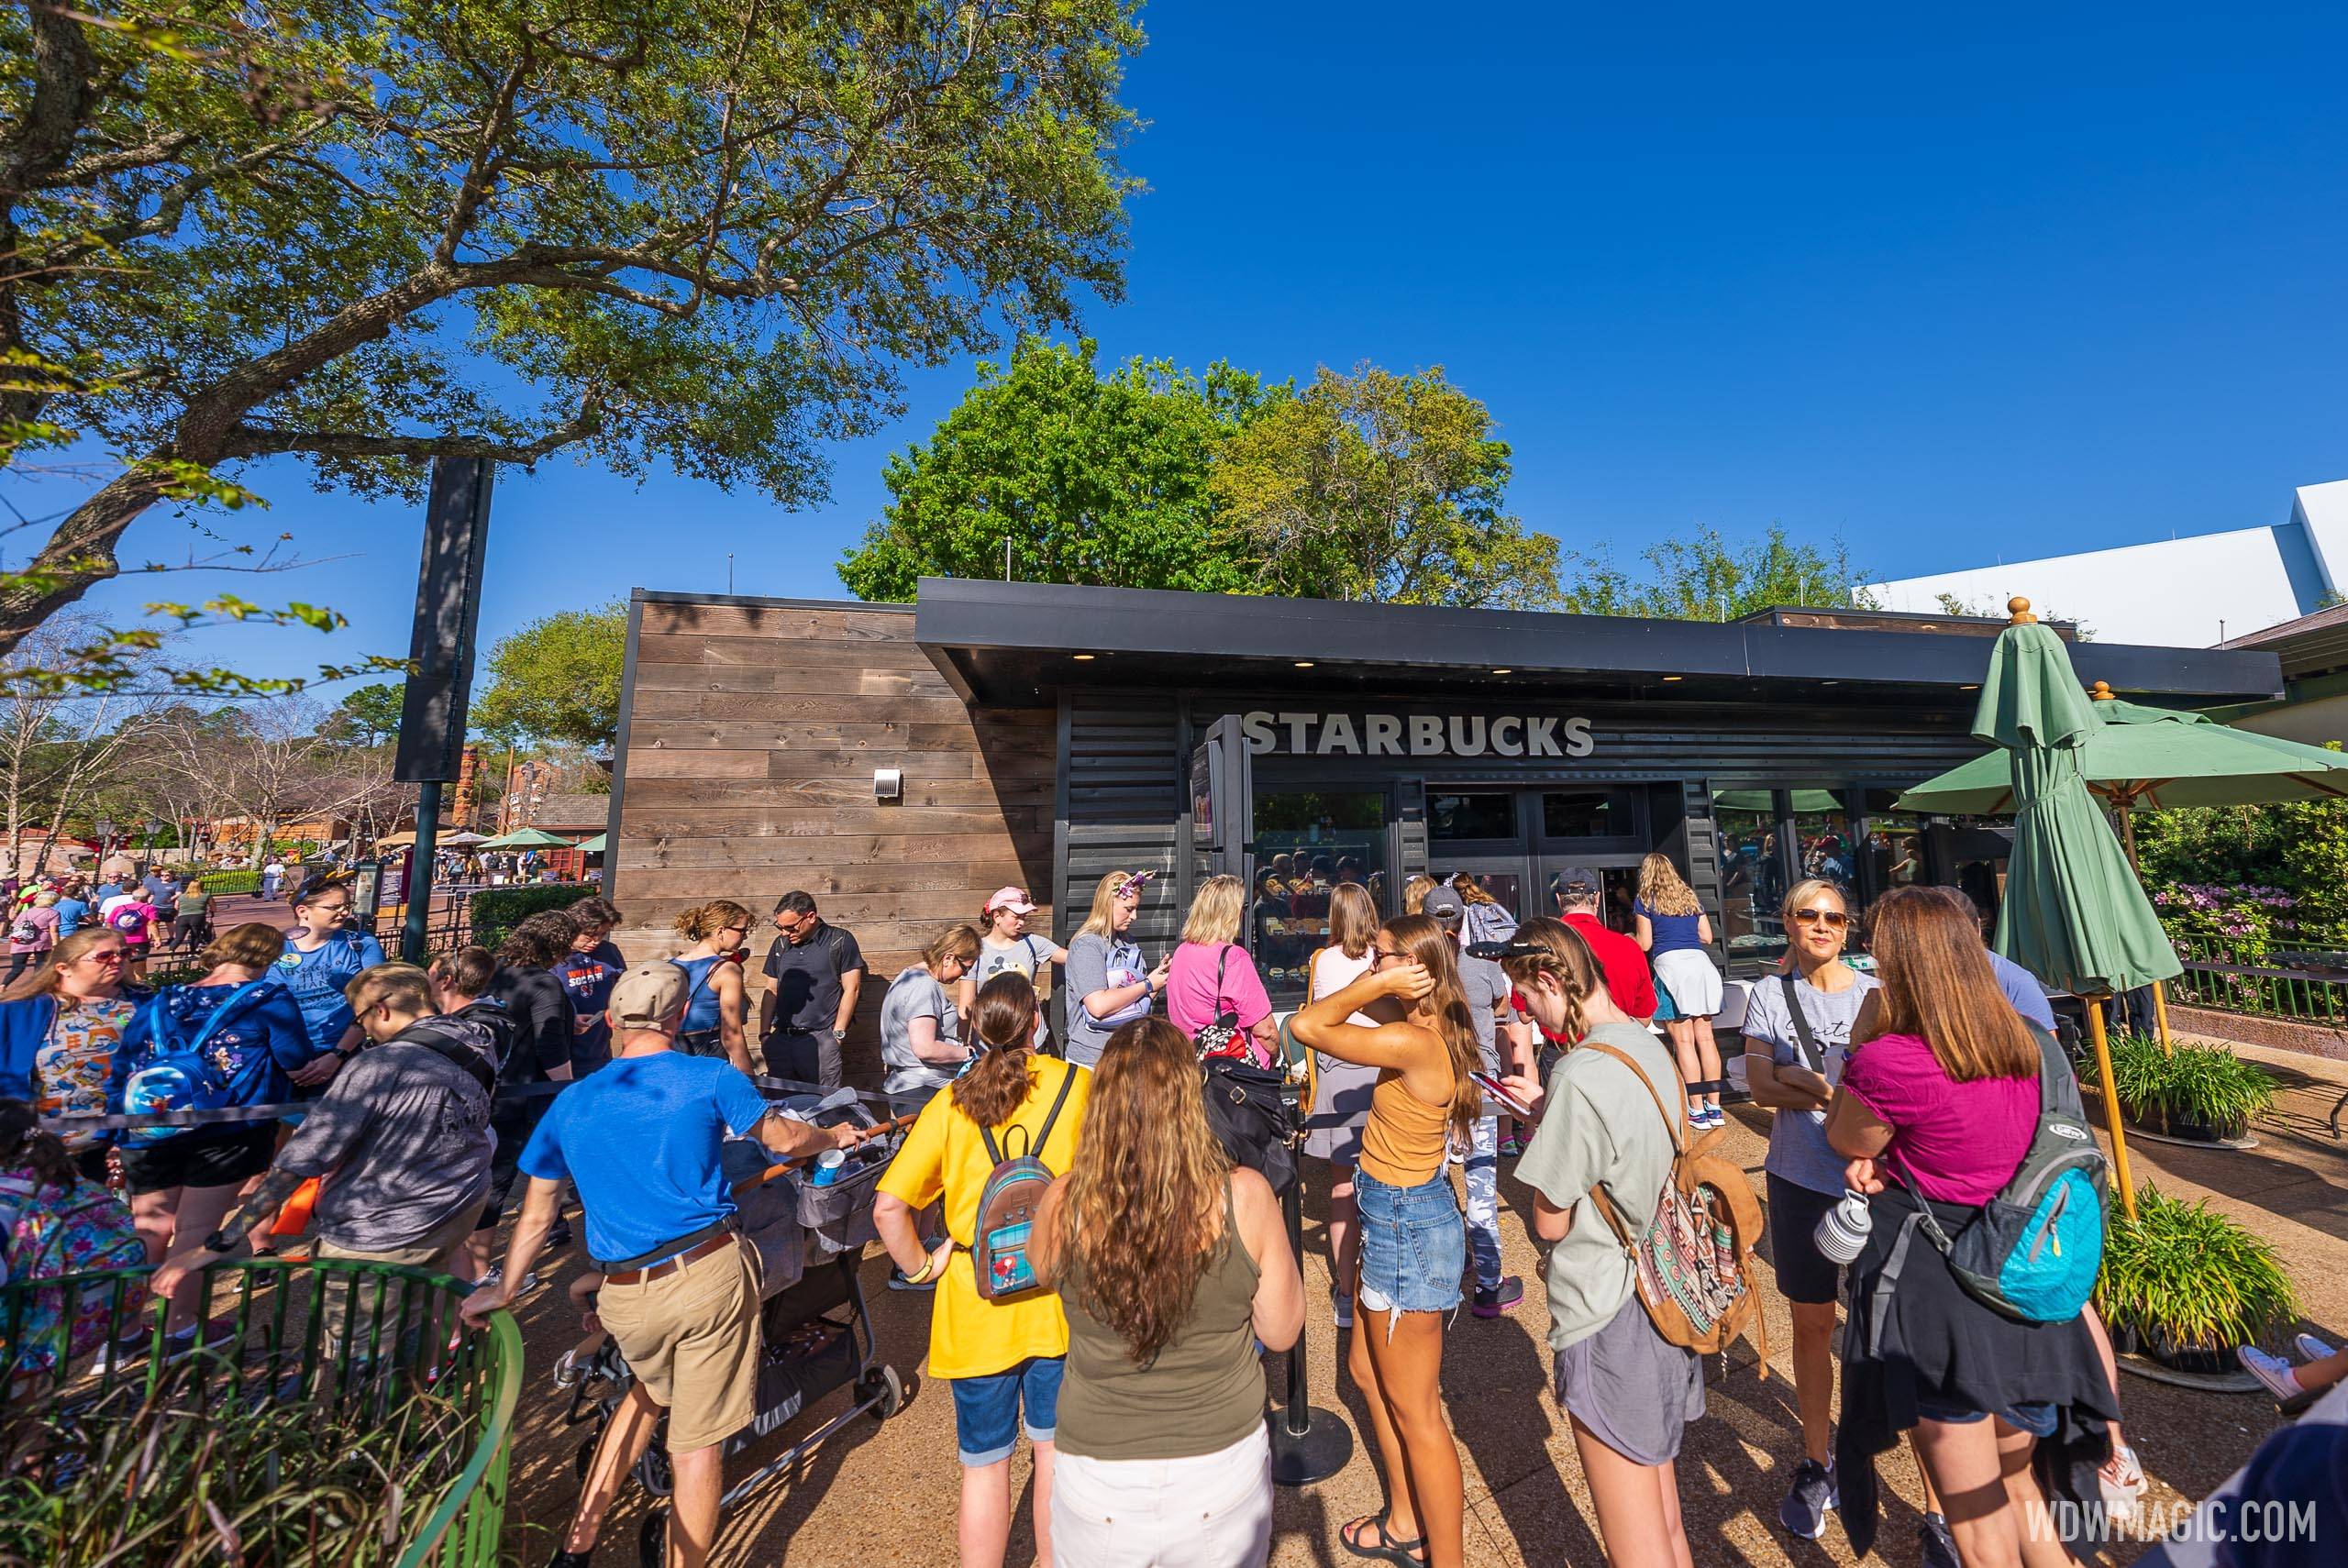 EPCOT's temporary Starbucks Traveler's Café to close alongside the opening of the new Connections Café